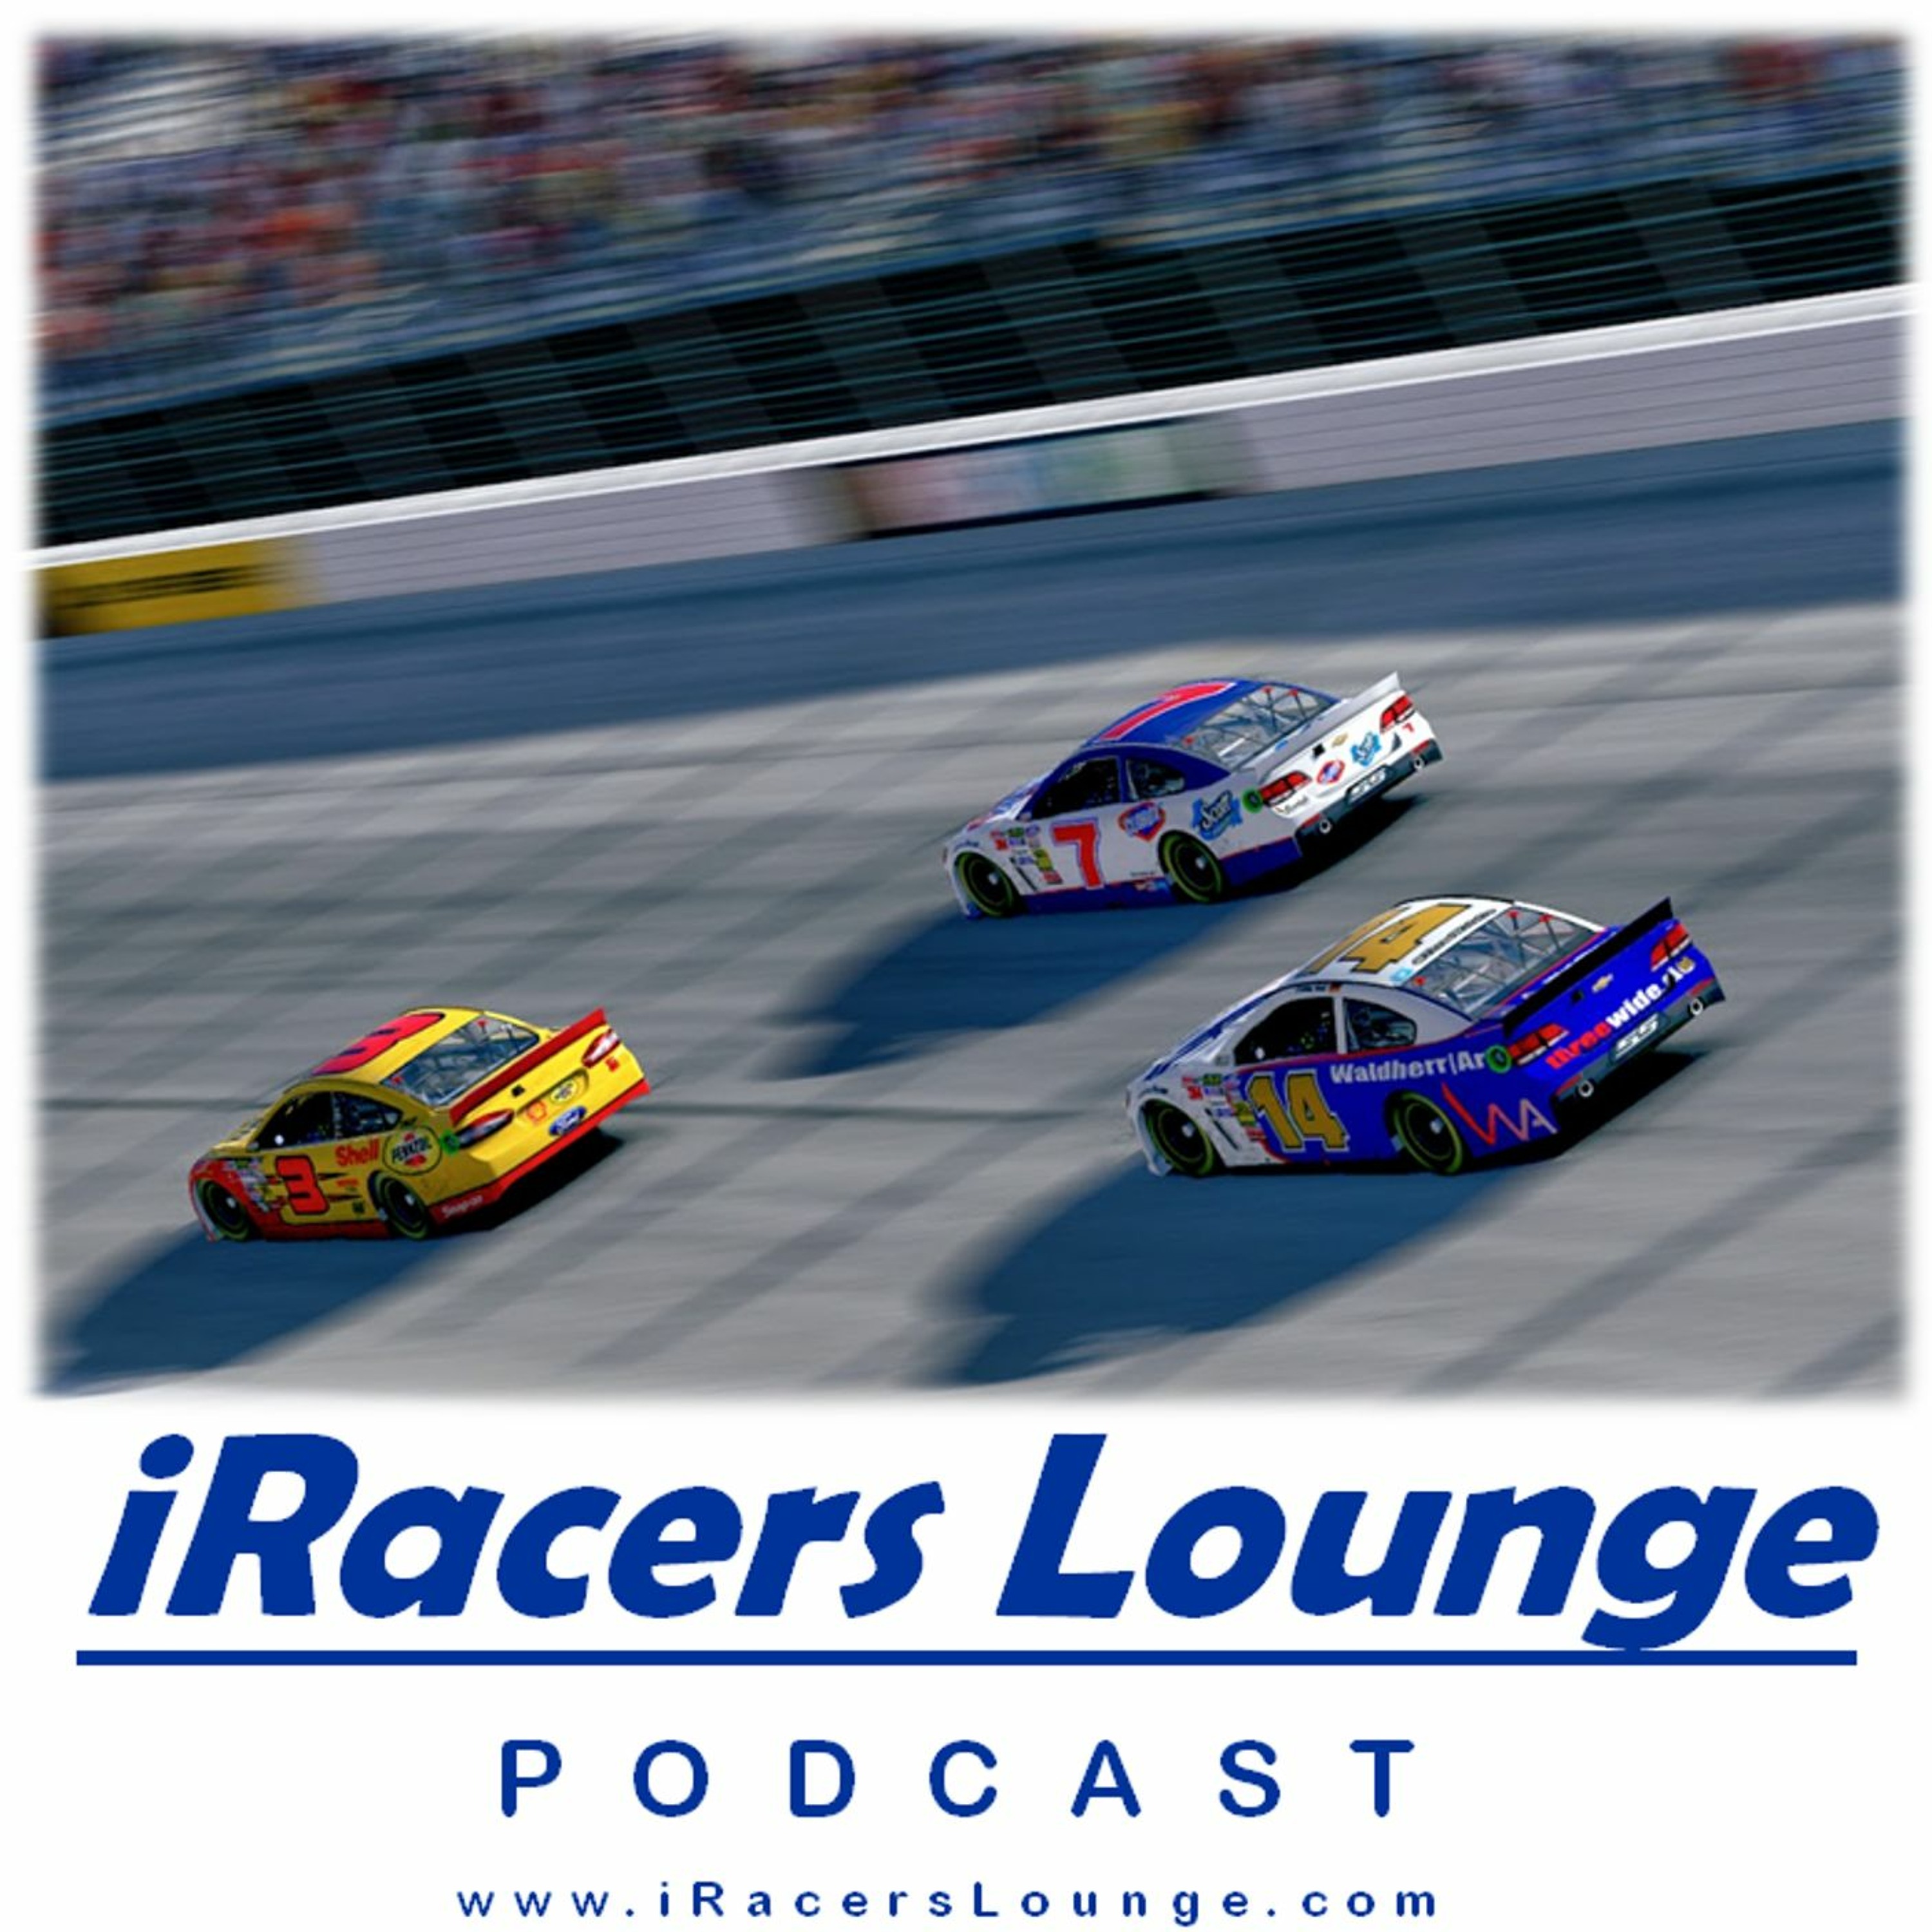 World Cup of iRacing - Episode 0048